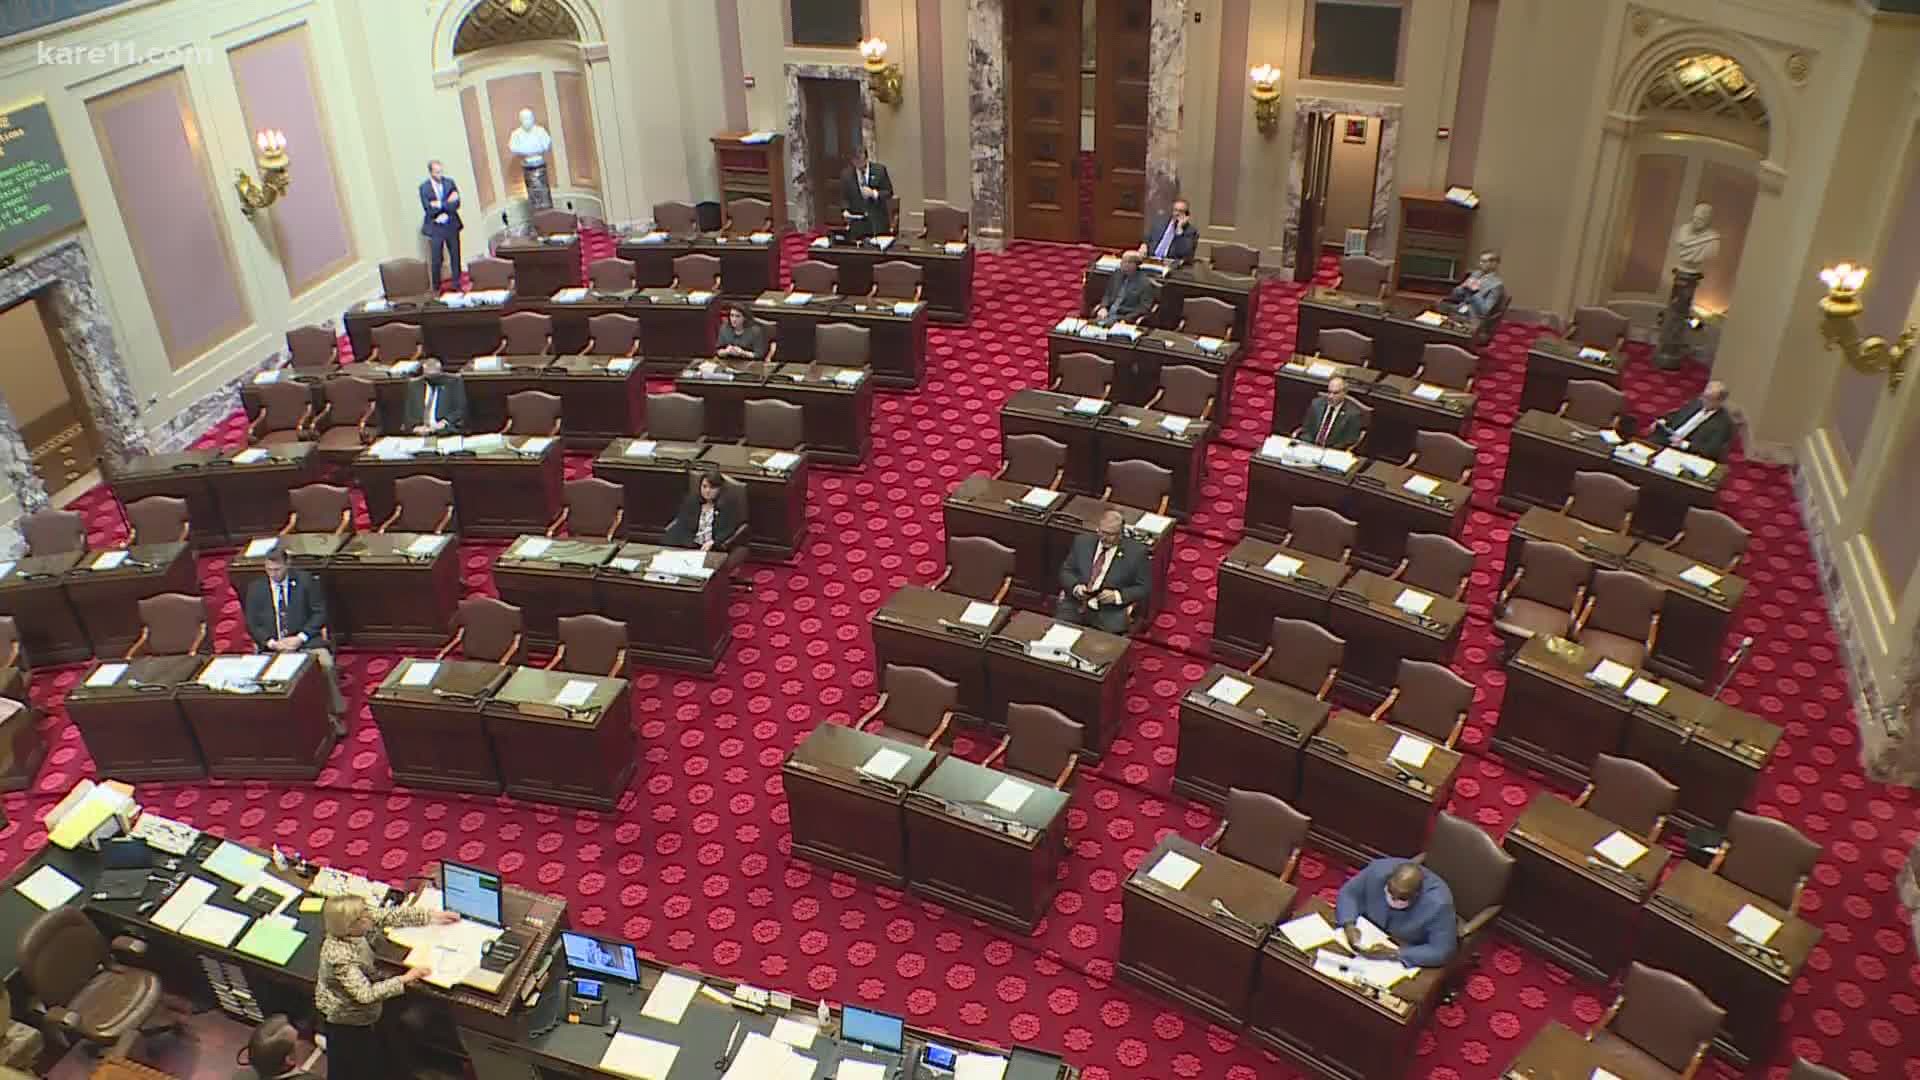 The Senate voted 32-34 on Nancy Leppink's confirmation in Wednesday's special session.